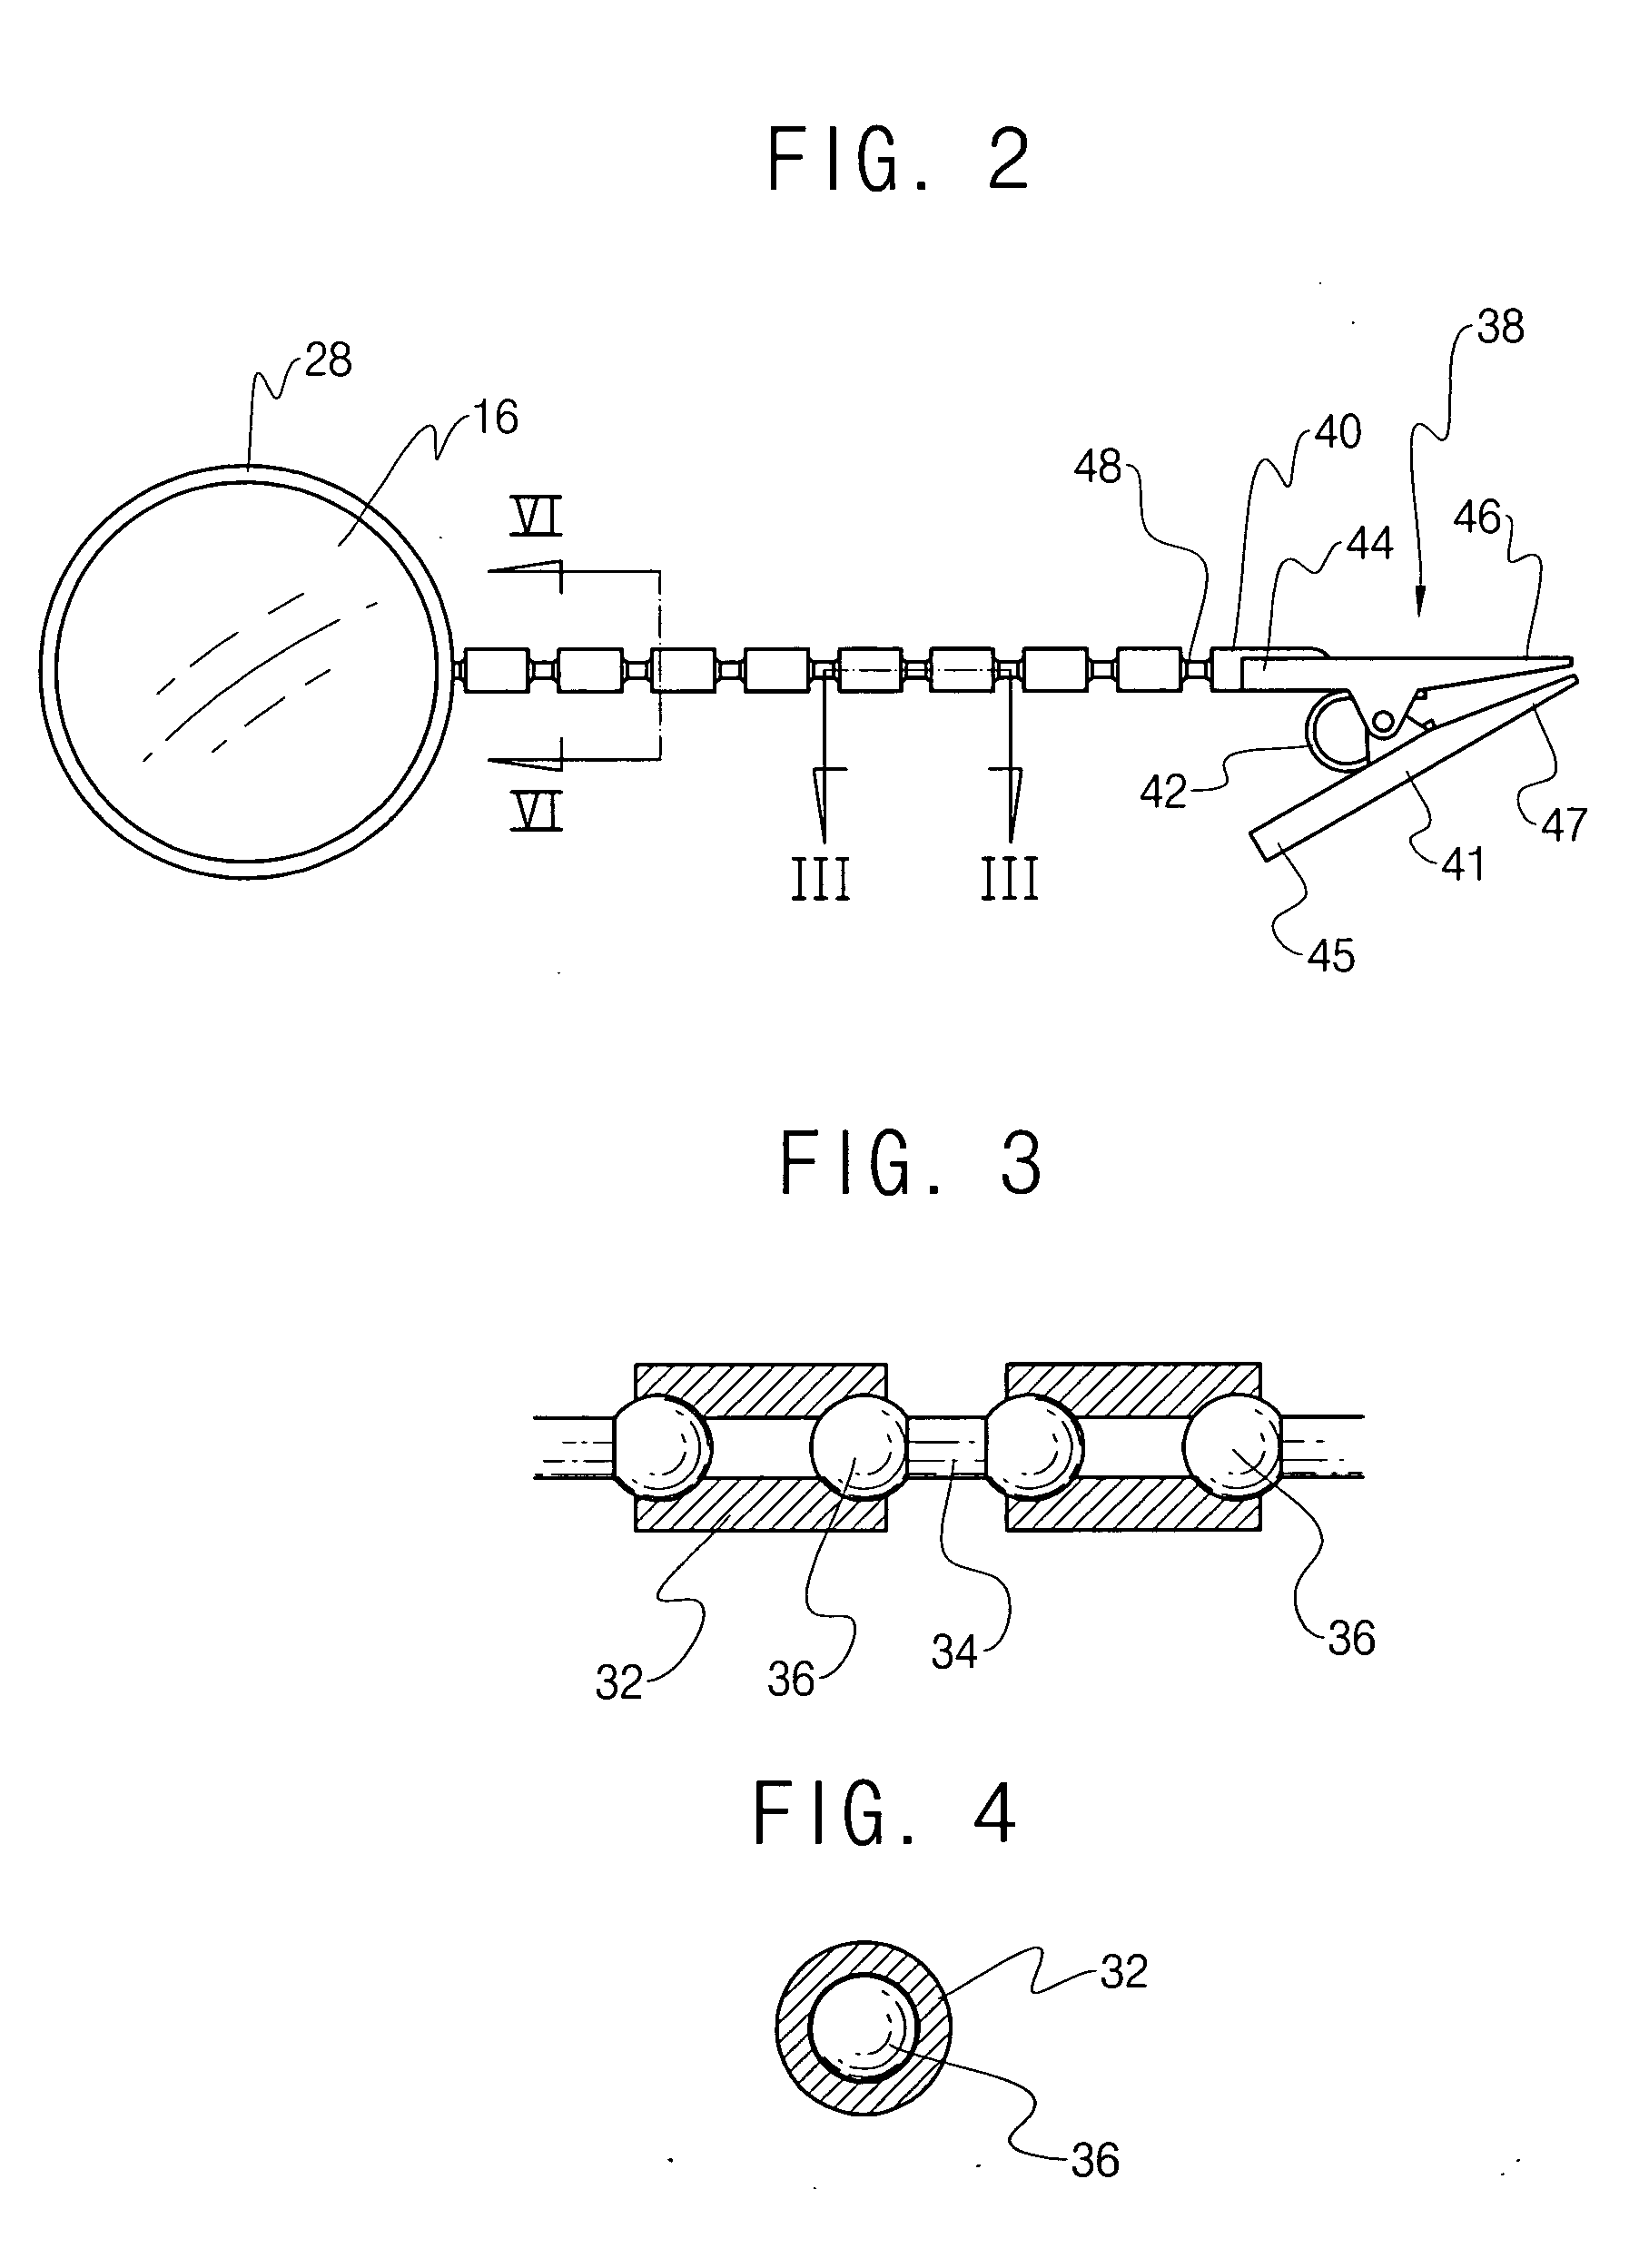 Flexible mirror device for a vehicle